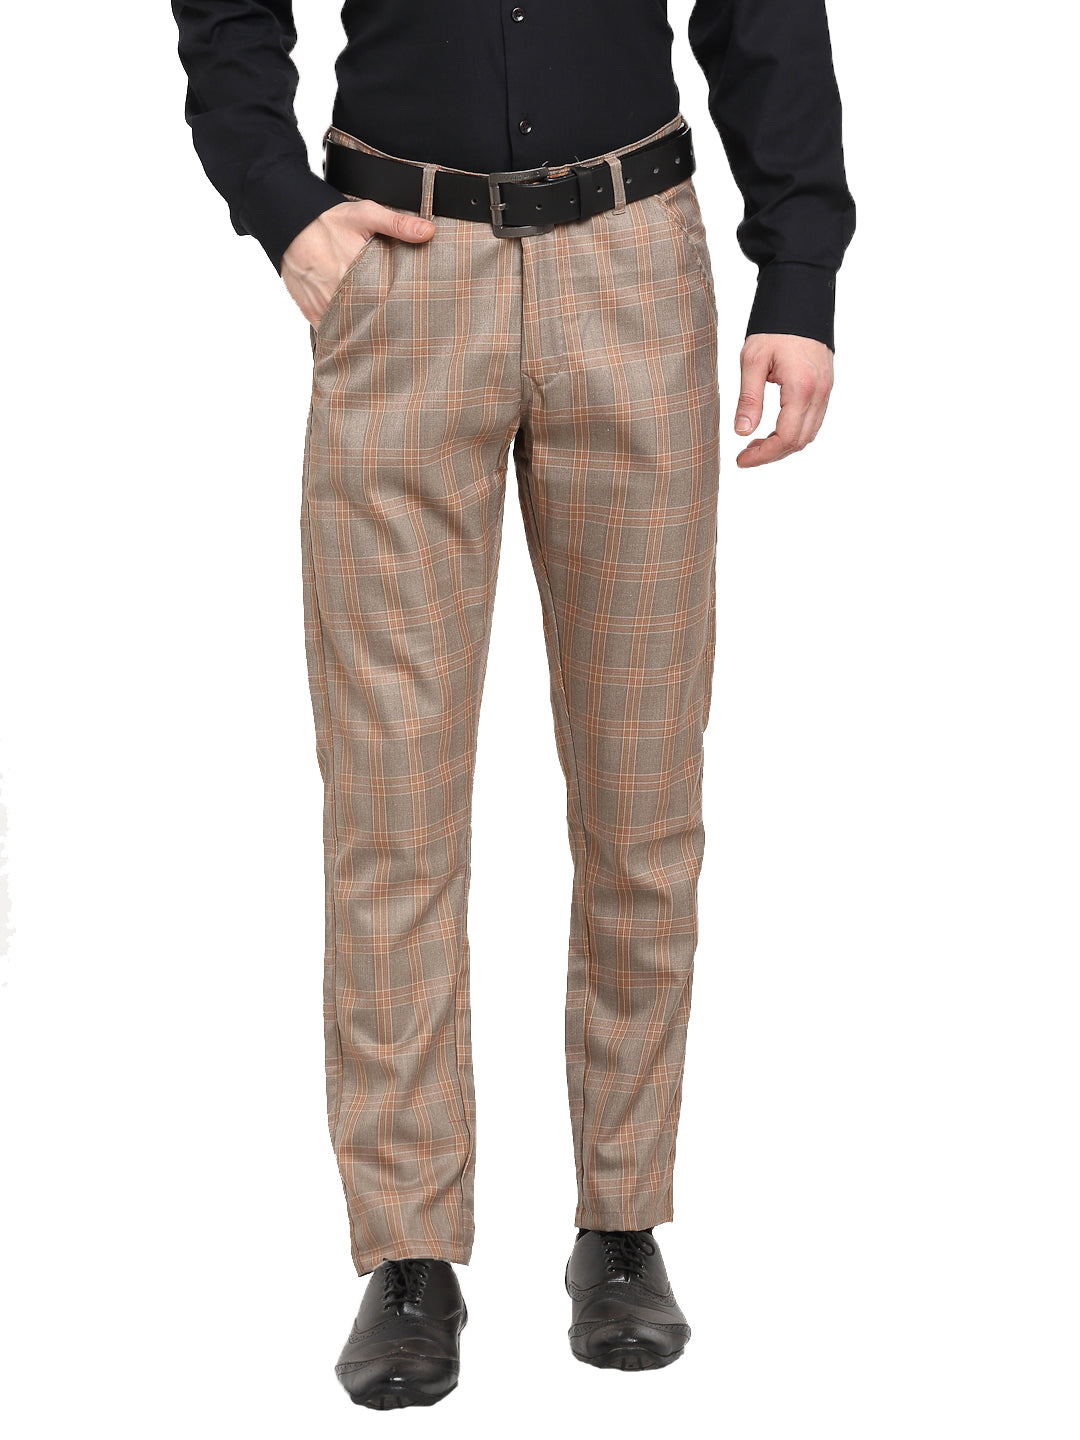 Indian trousers for men : nepal hippy and boho pants - FantaZia